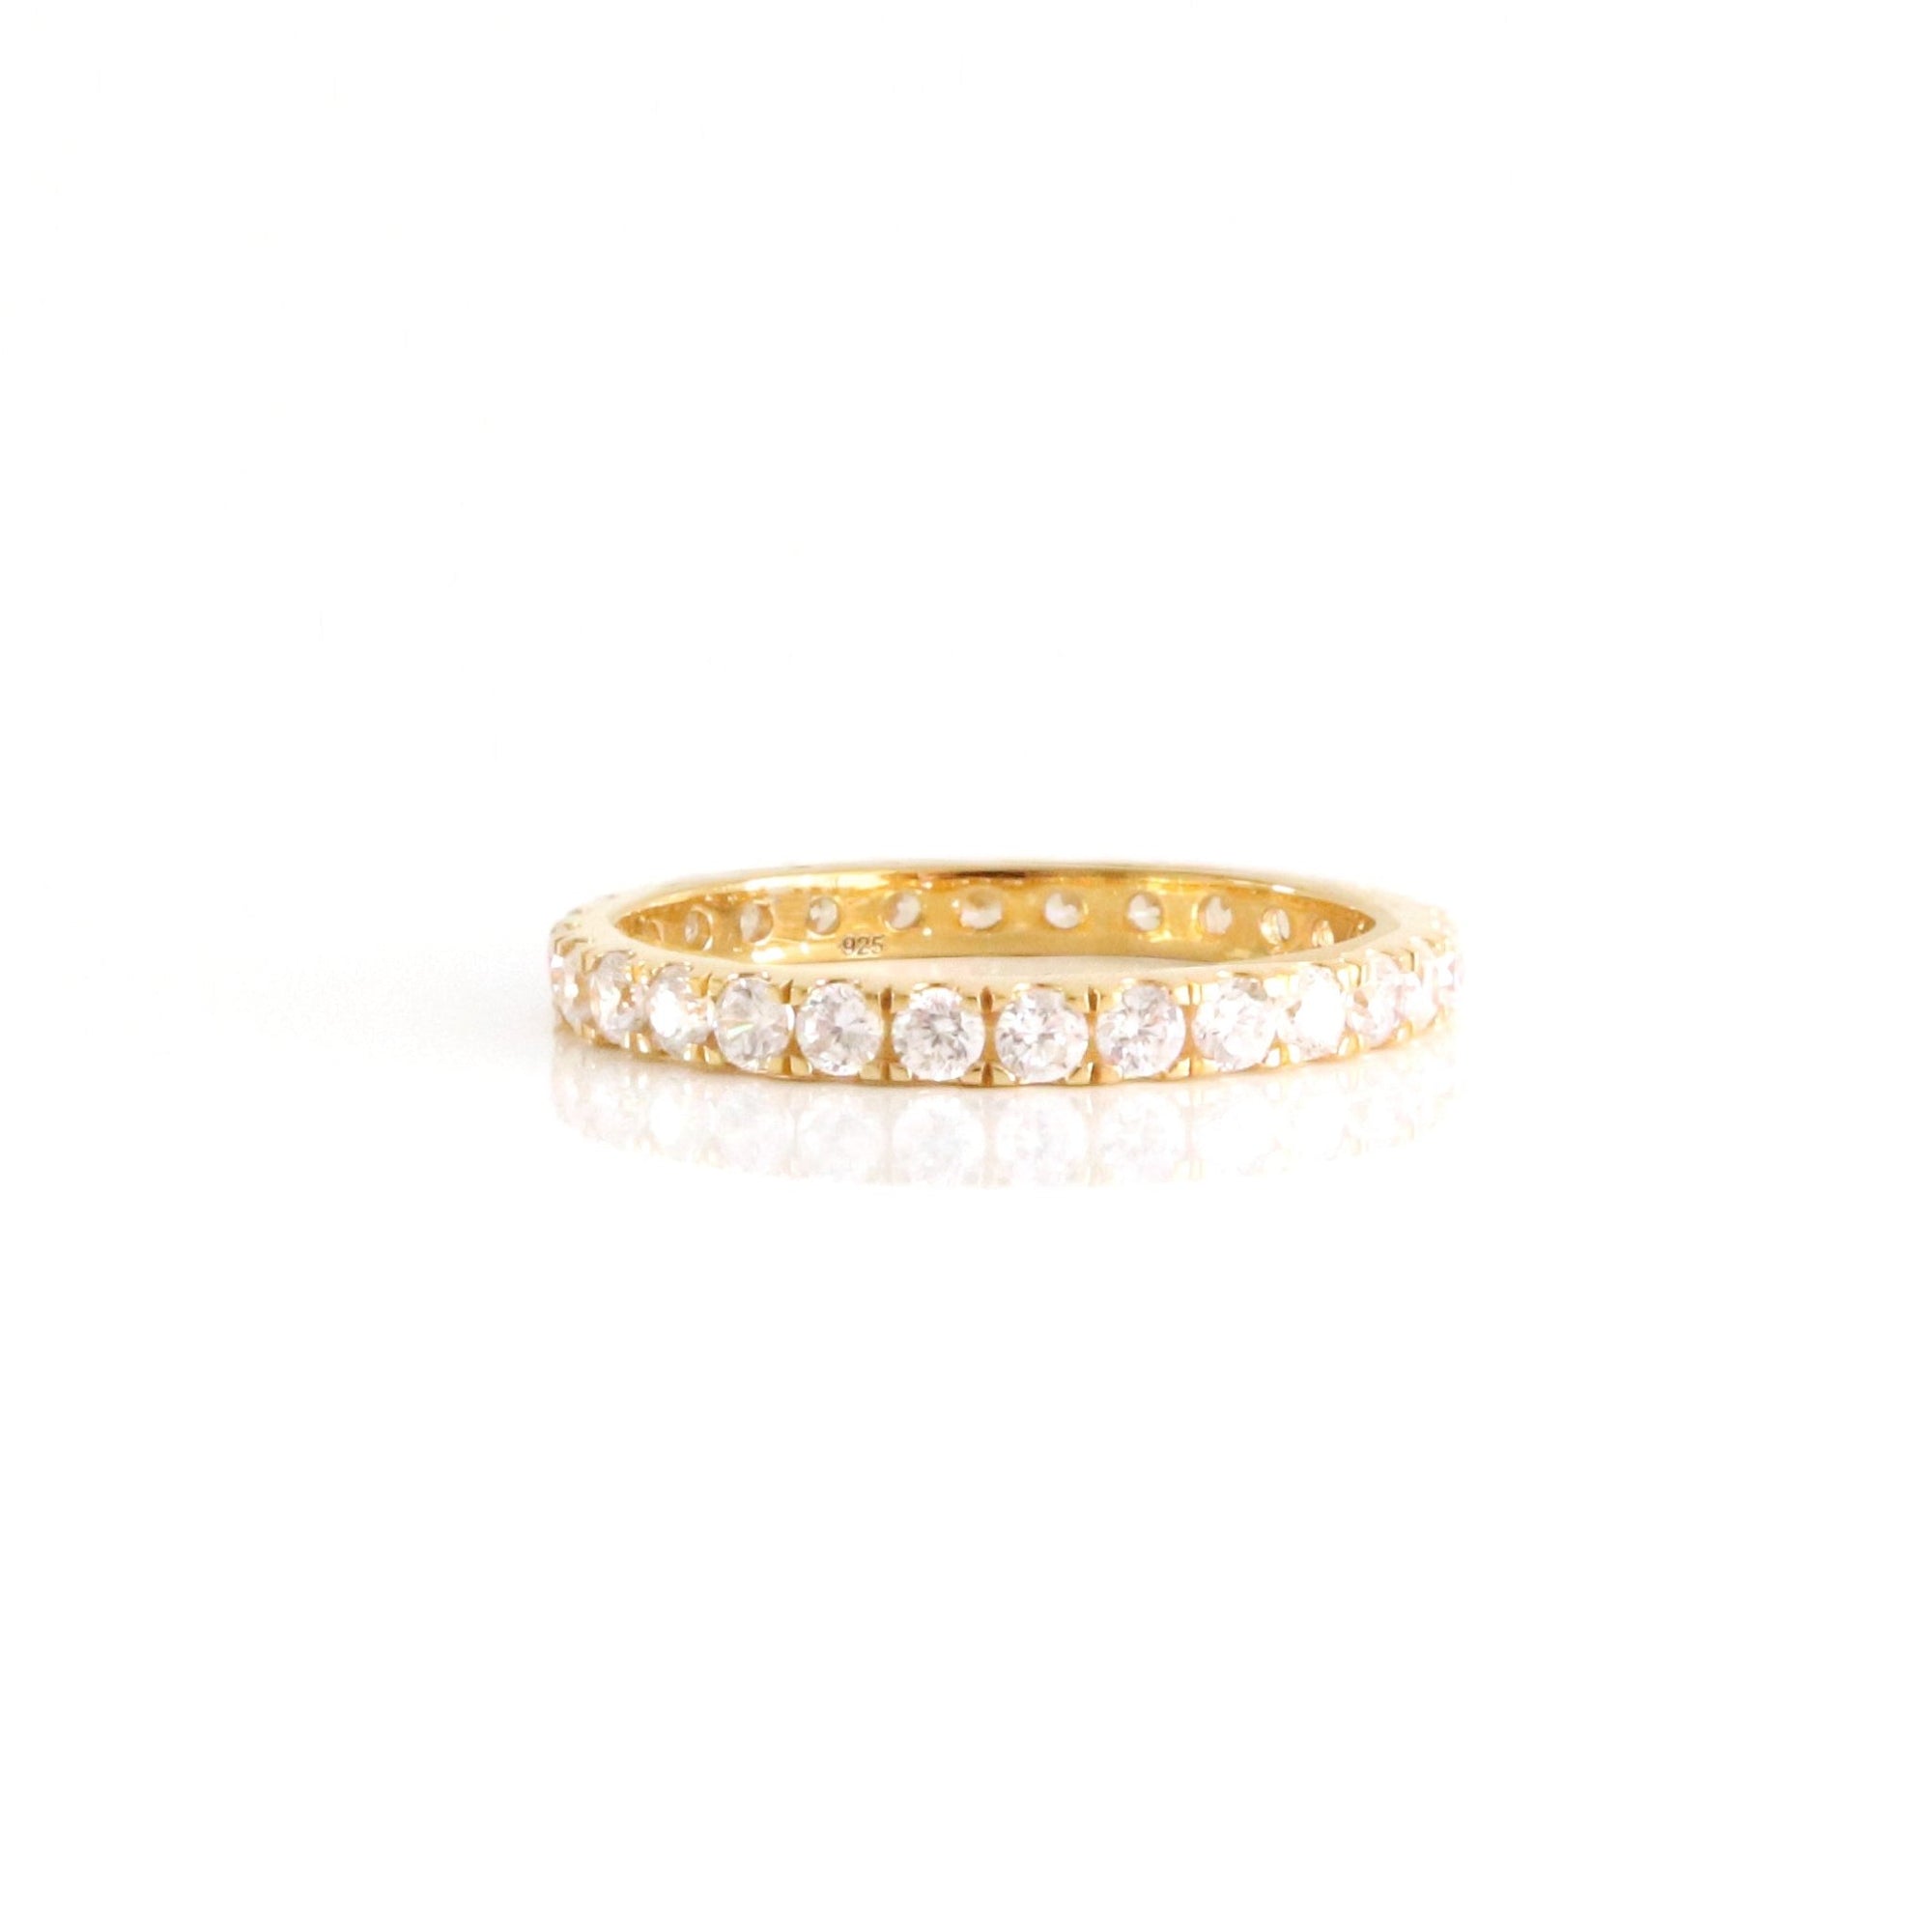 LOVE ETERNITY BAND - CUBIC ZIRCONIA & GOLD - SO PRETTY CARA COTTER